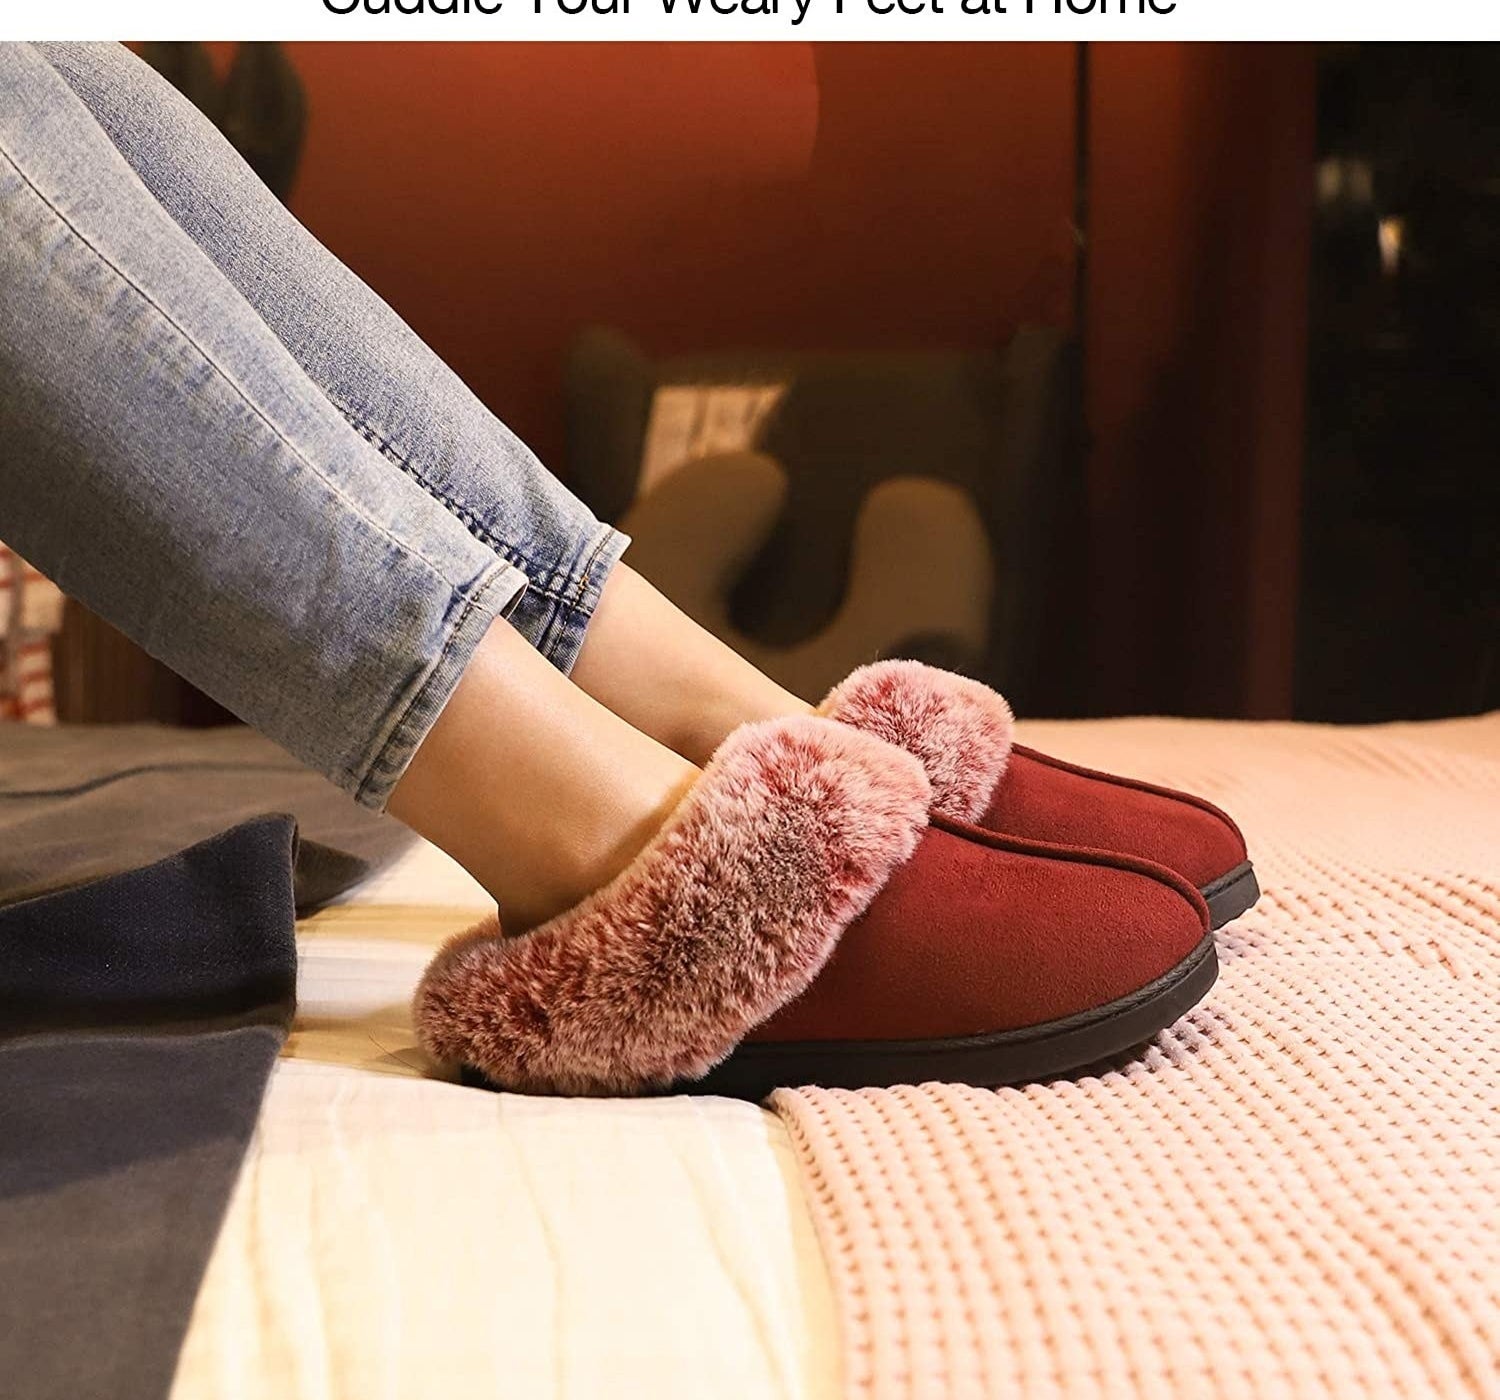 A person wearing slippers in bed